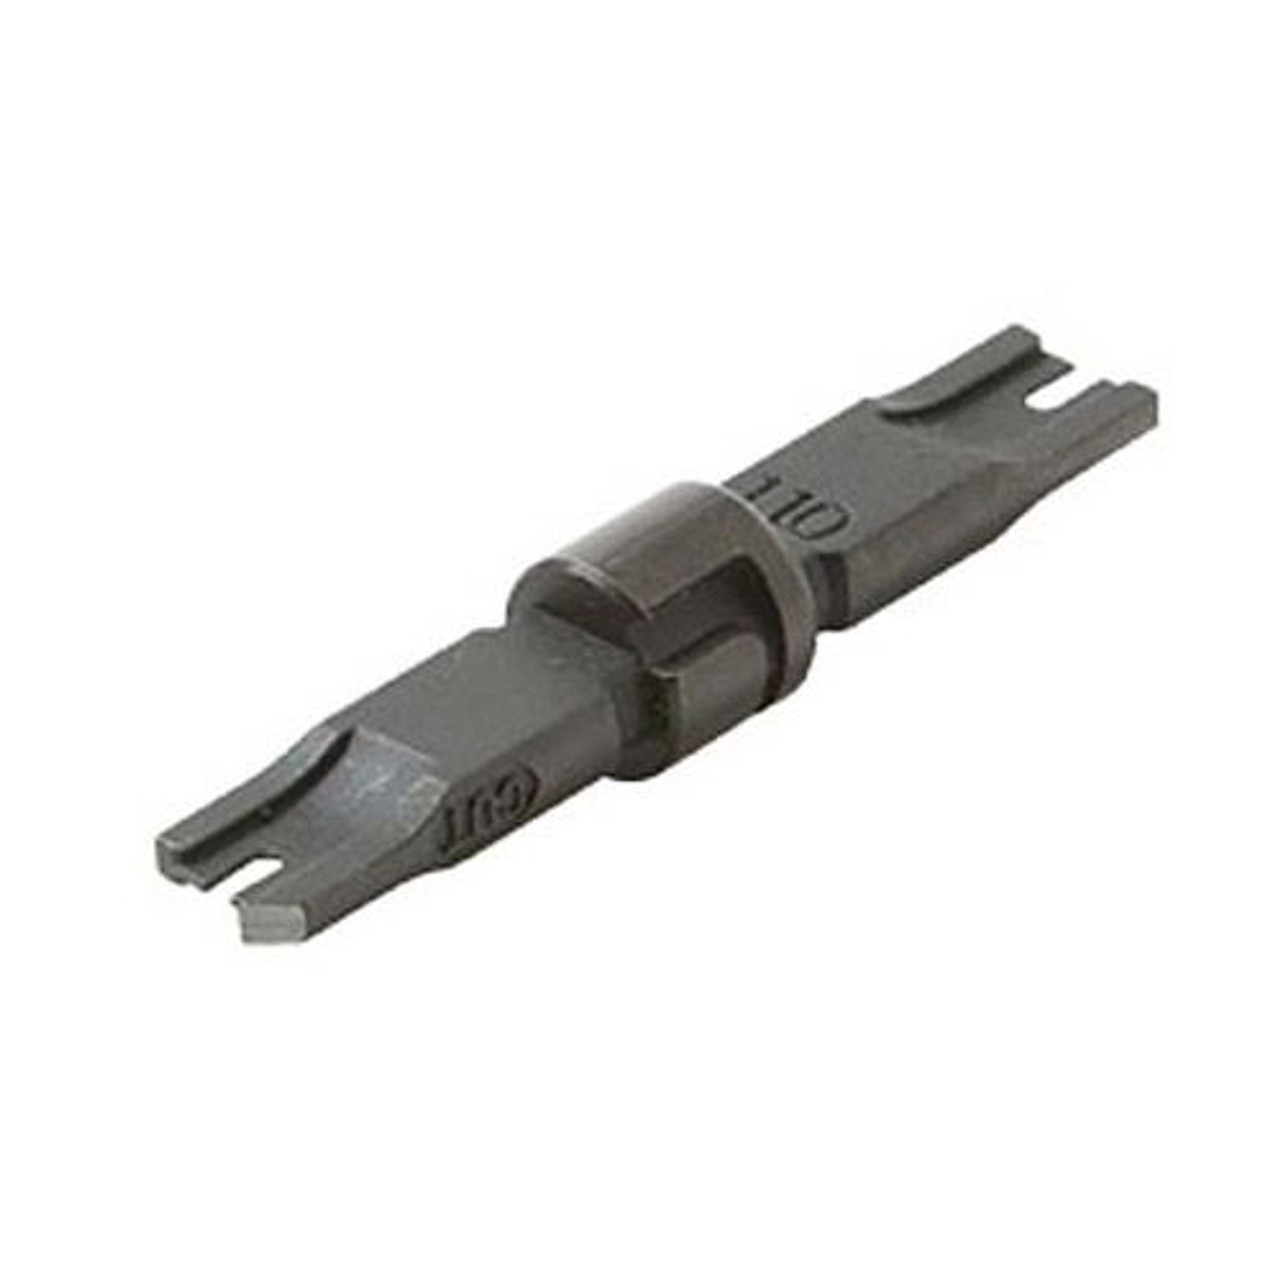 Steren 300-677 110/88 Punch Down Blade Replacement for 300-653 and 300-658 Impact Tool Punch Down 110/88 Blocks Spare Blade, Modular Network Punch Down Tool 110/88 Block Blade, Part # 300677